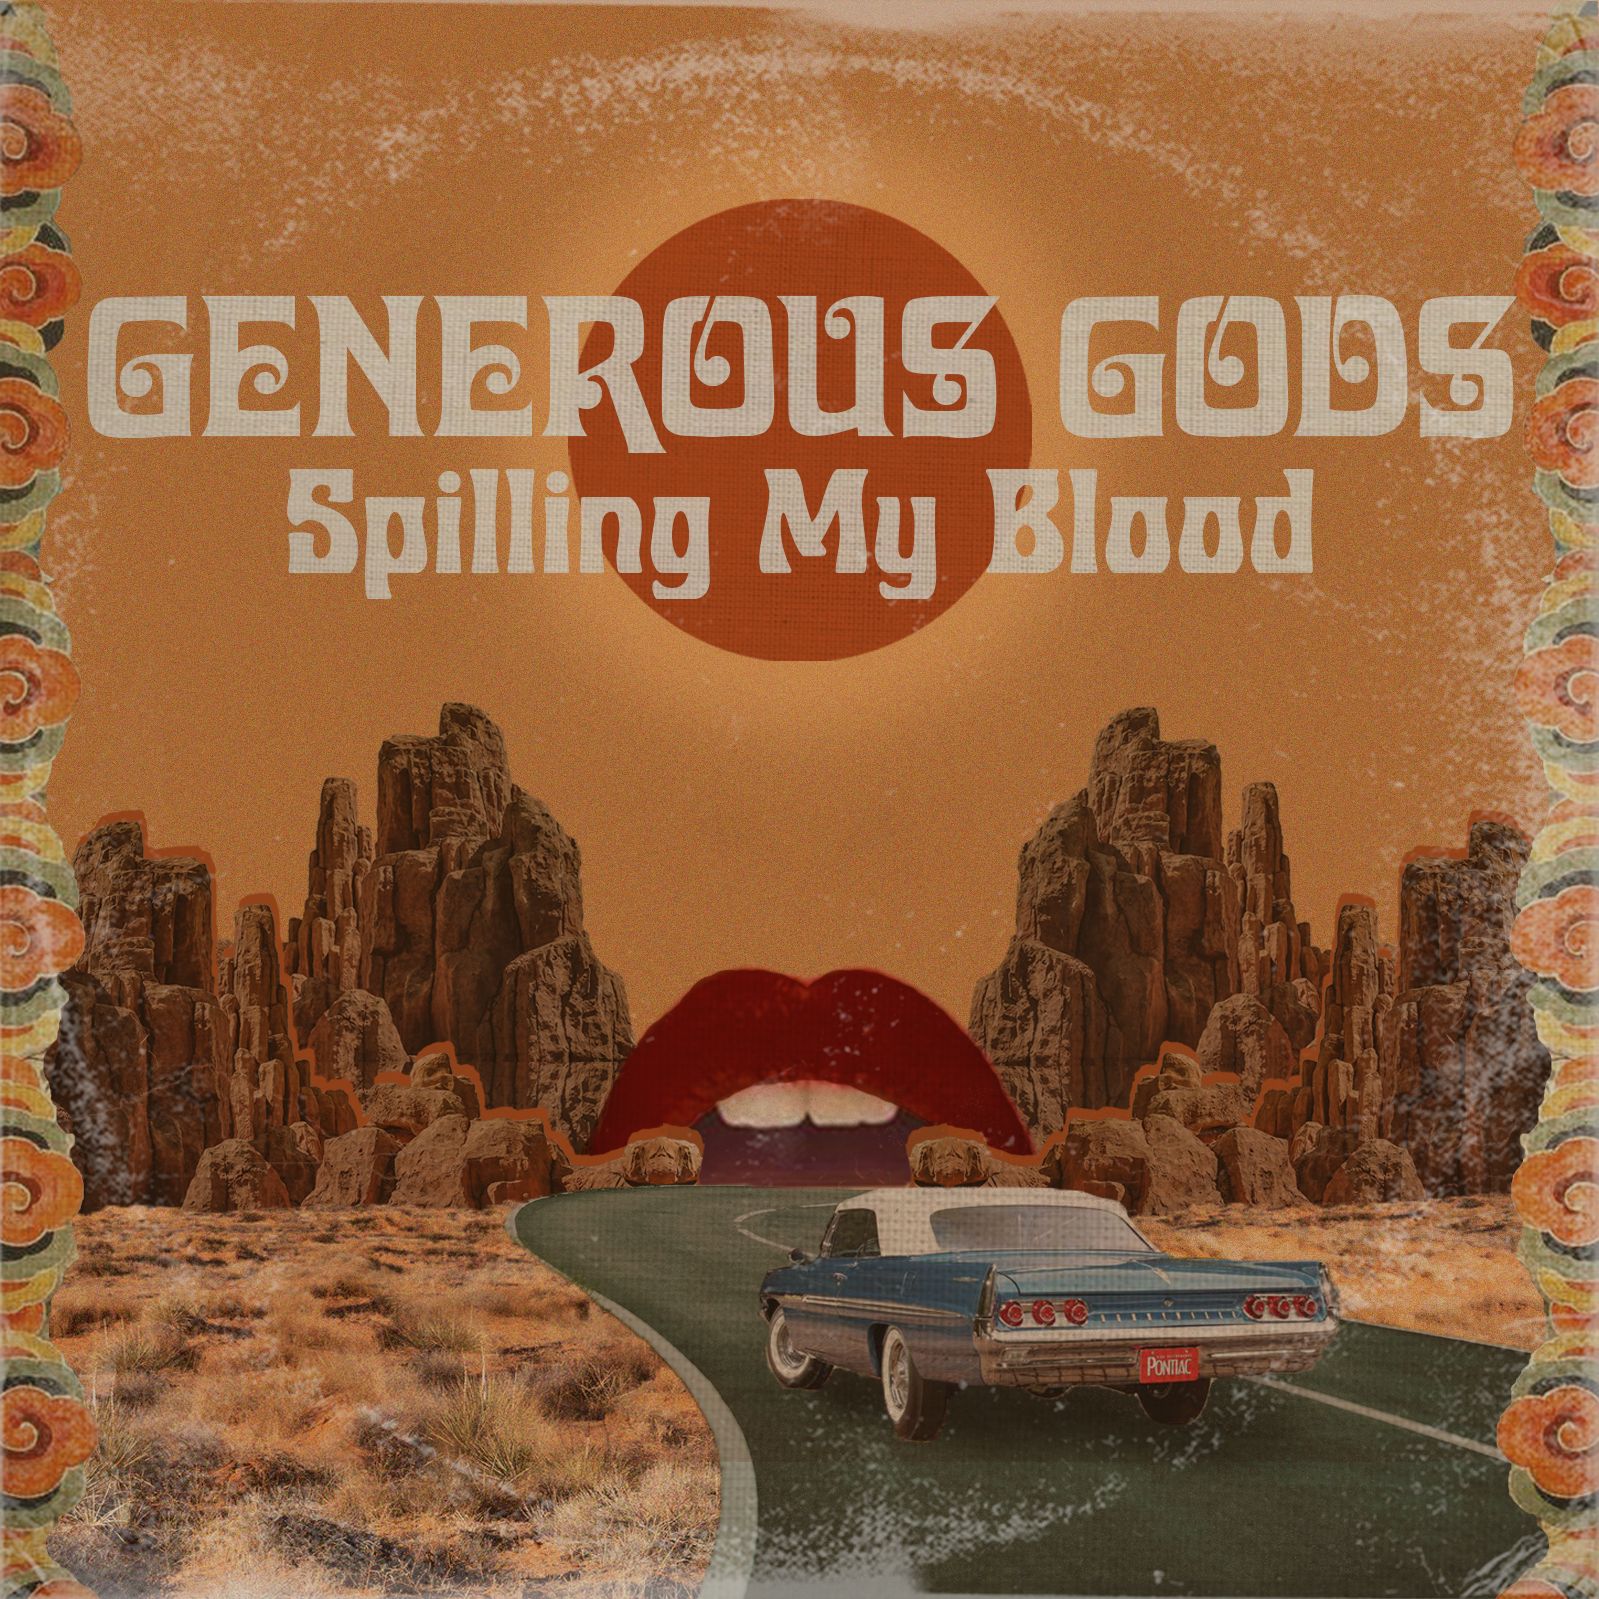 spilling my blood - generous gods - usa - indie - indie music - indie rock - new music - music blog - wolf in a suit - wolfinasuit - wolf in a suit blog - wolf in a suit music blog